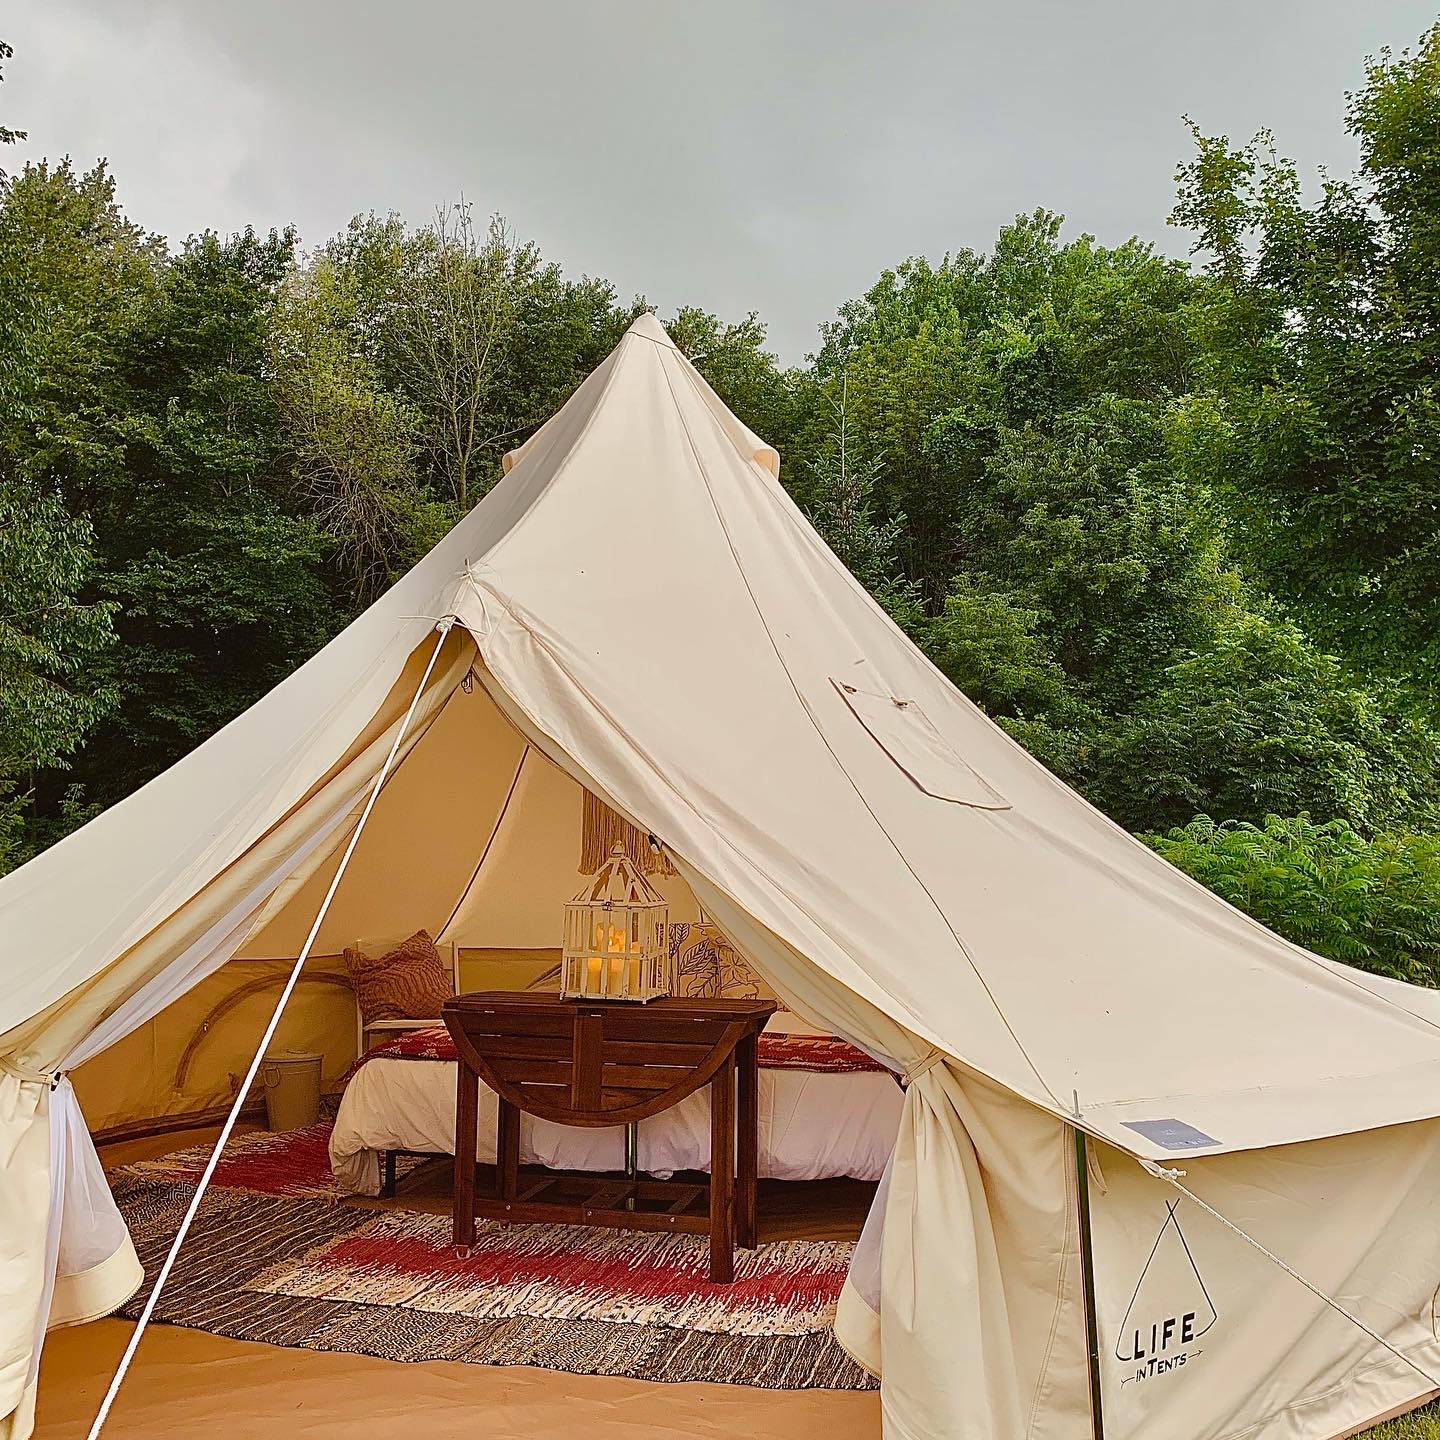 King size bed configuration show. We will customize based on the number of visitors you have. 
5 meter Bell tent shown here, actual bell tent model may differ, but quality and amenities will not. 